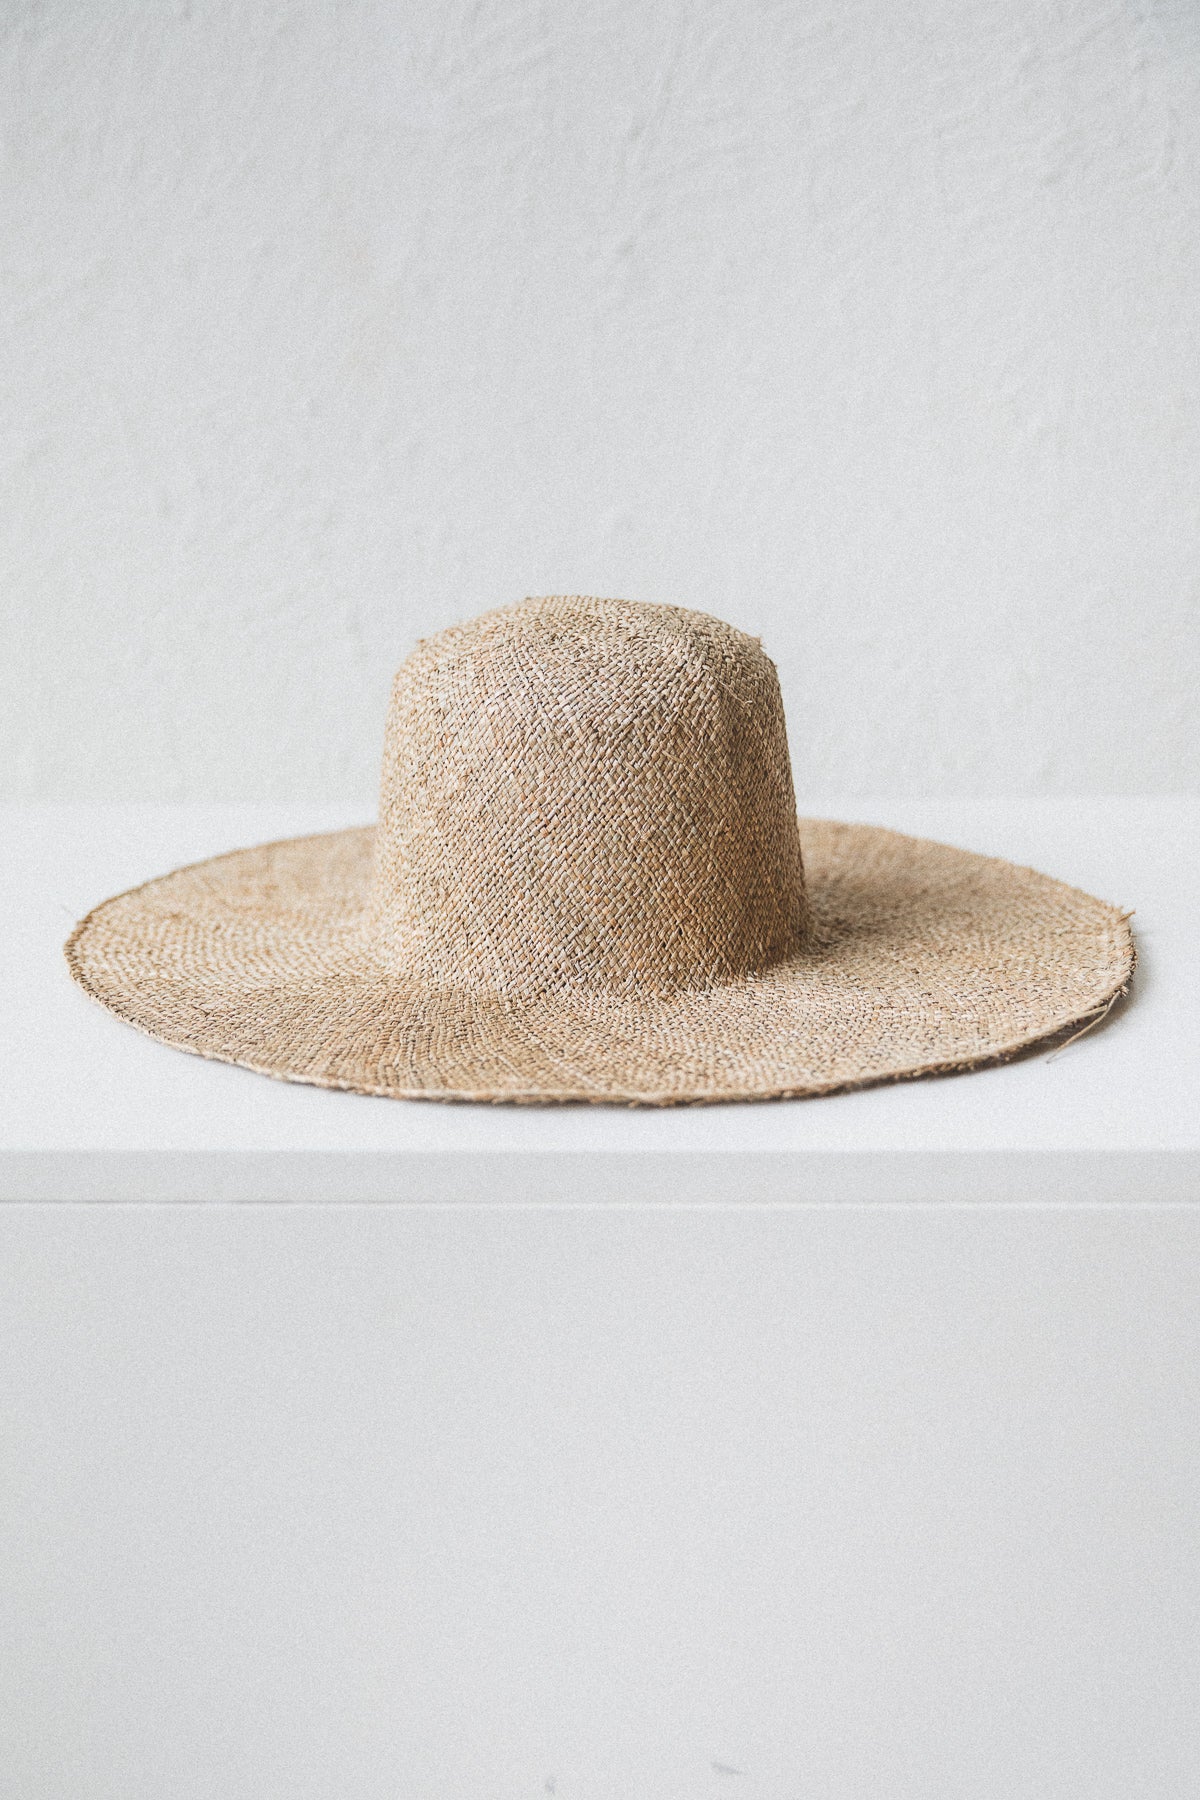 OPTIMO PACKABLE HAT IN SEAGRASS STRAW — Shop Boswell